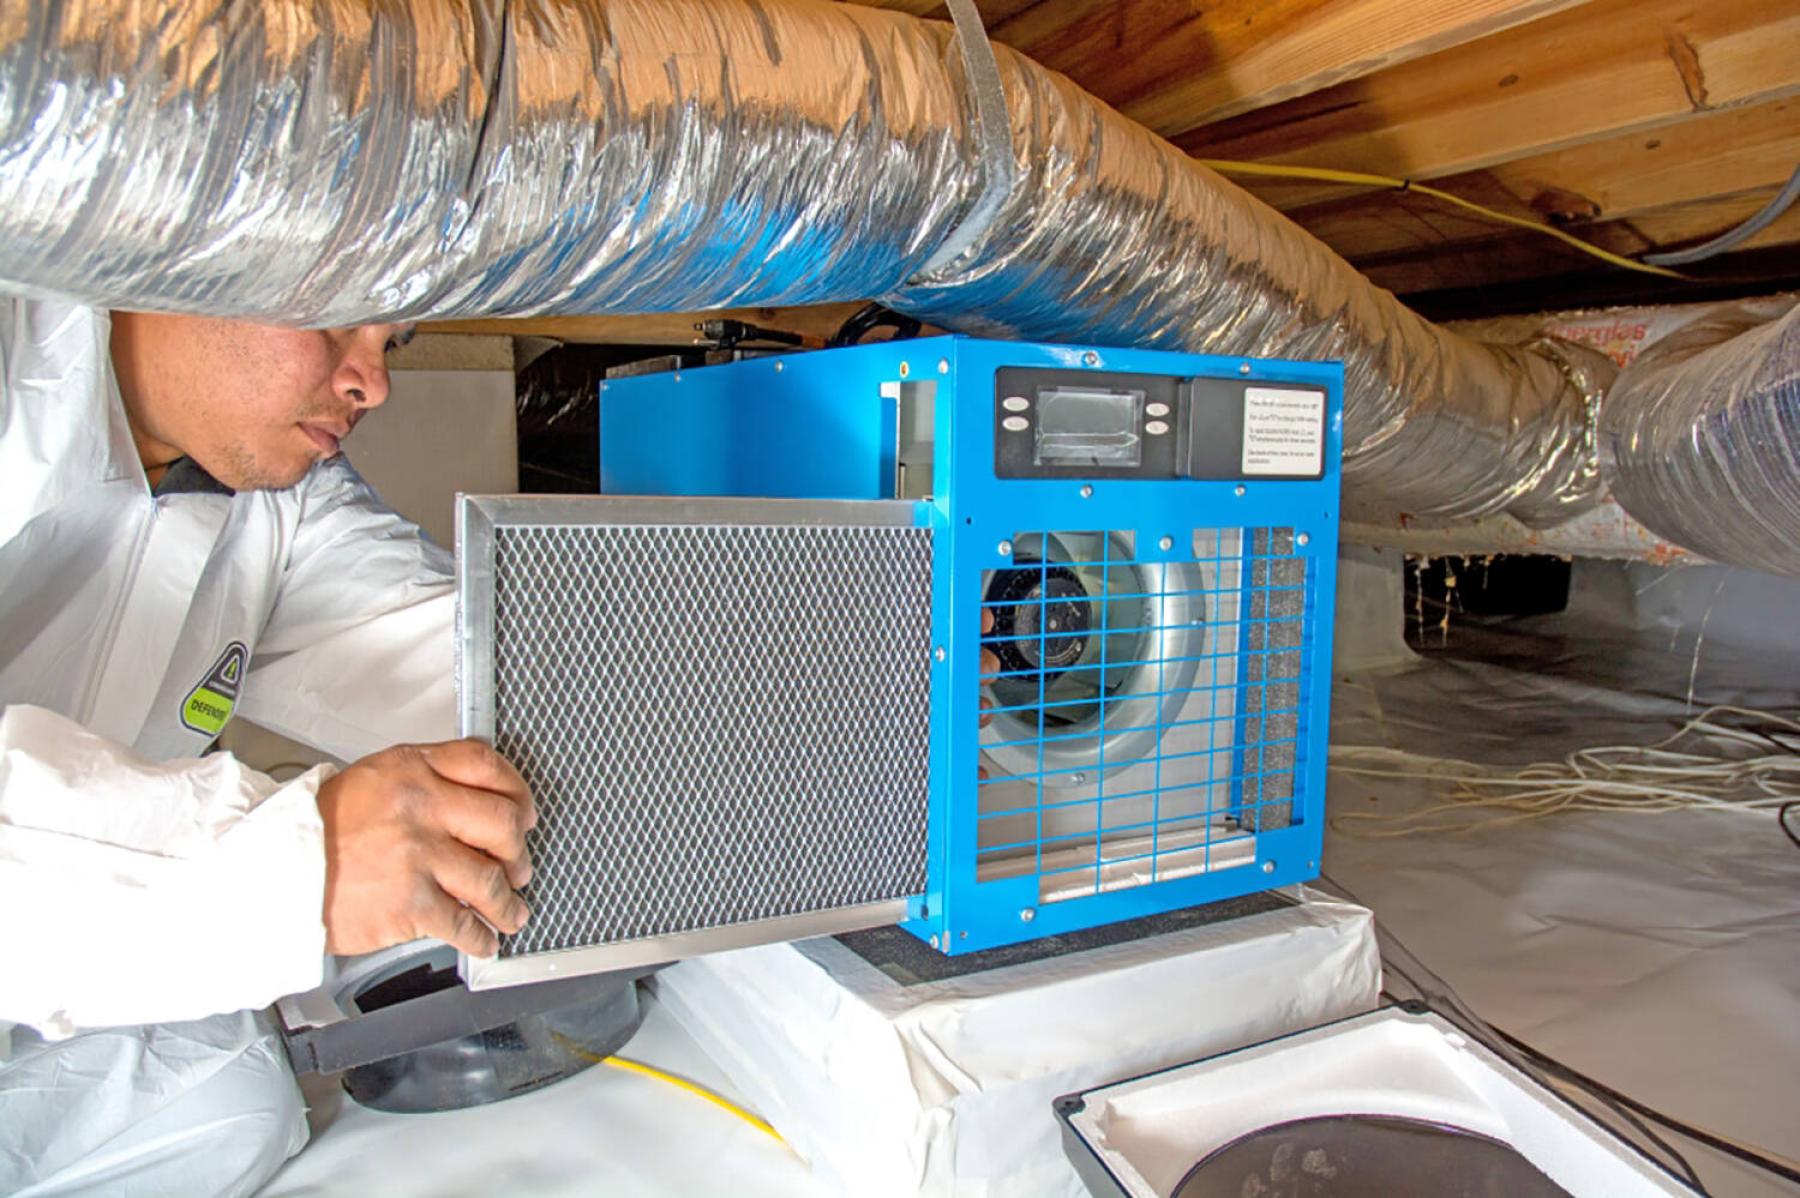  <p>TNS</p>
                                <p>A dehumidifier can go a long way to help reduce moisture in your crawlspace.</p>
                                <p>TNS</p>
                                <p>A dehumidifier can go a long way to help reduce moisture in your crawlspace.</p> 